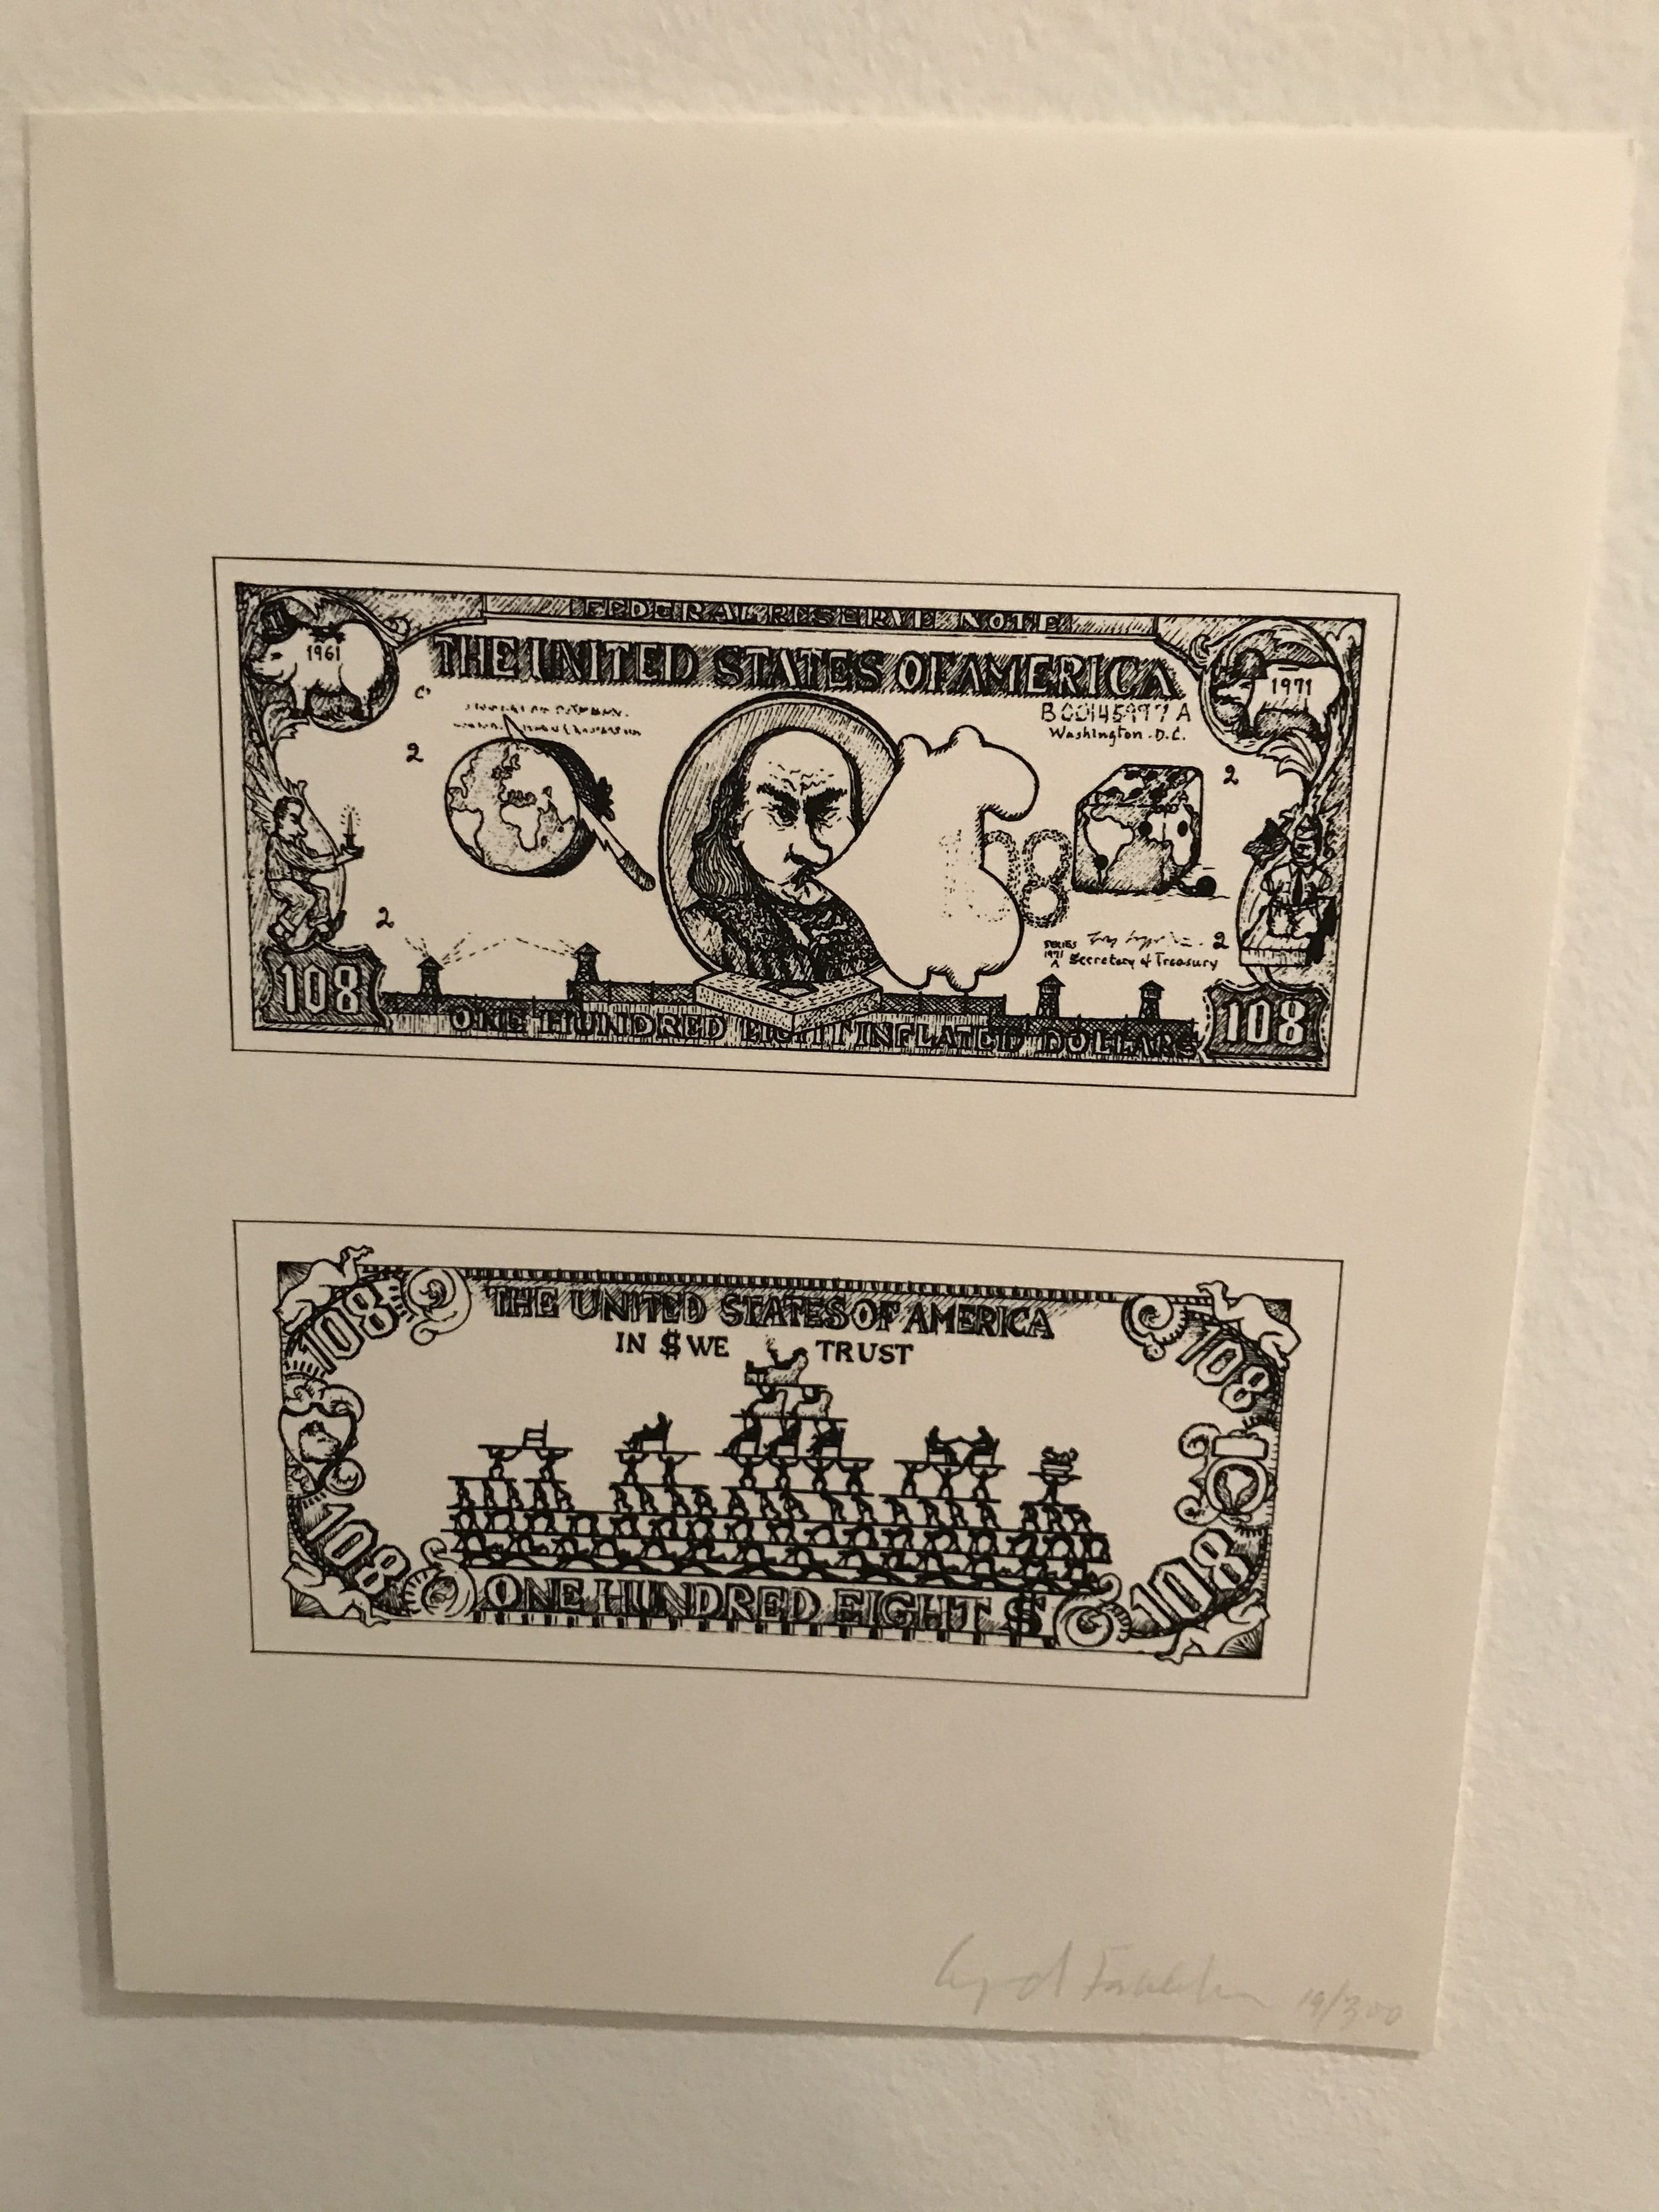 $108 Bill (from The New York Collection for Stockholm portfolio), 1973 Enlarged